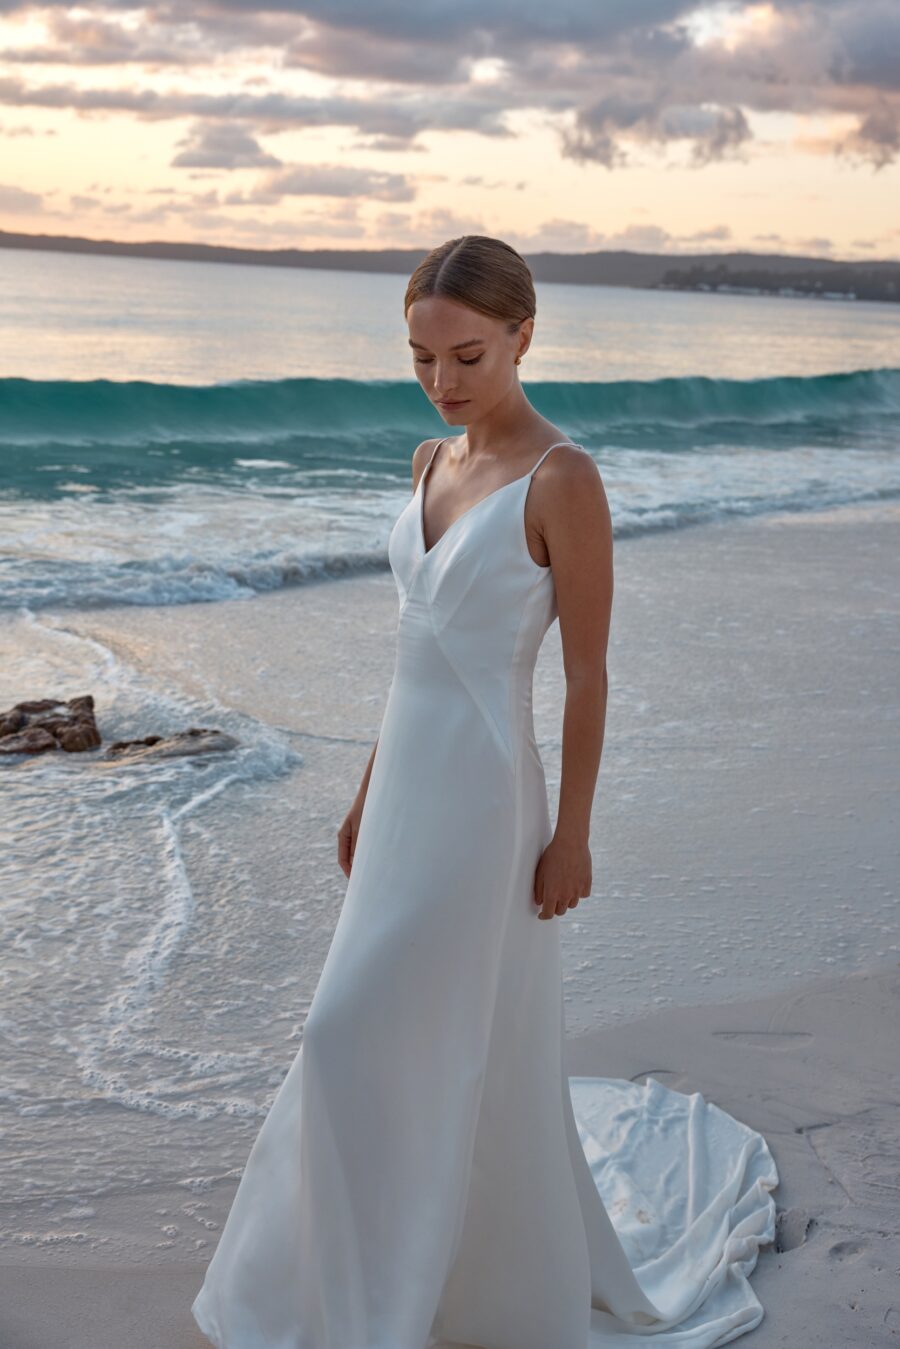 June 4 wedding dress by woná concept from atelier signature collection